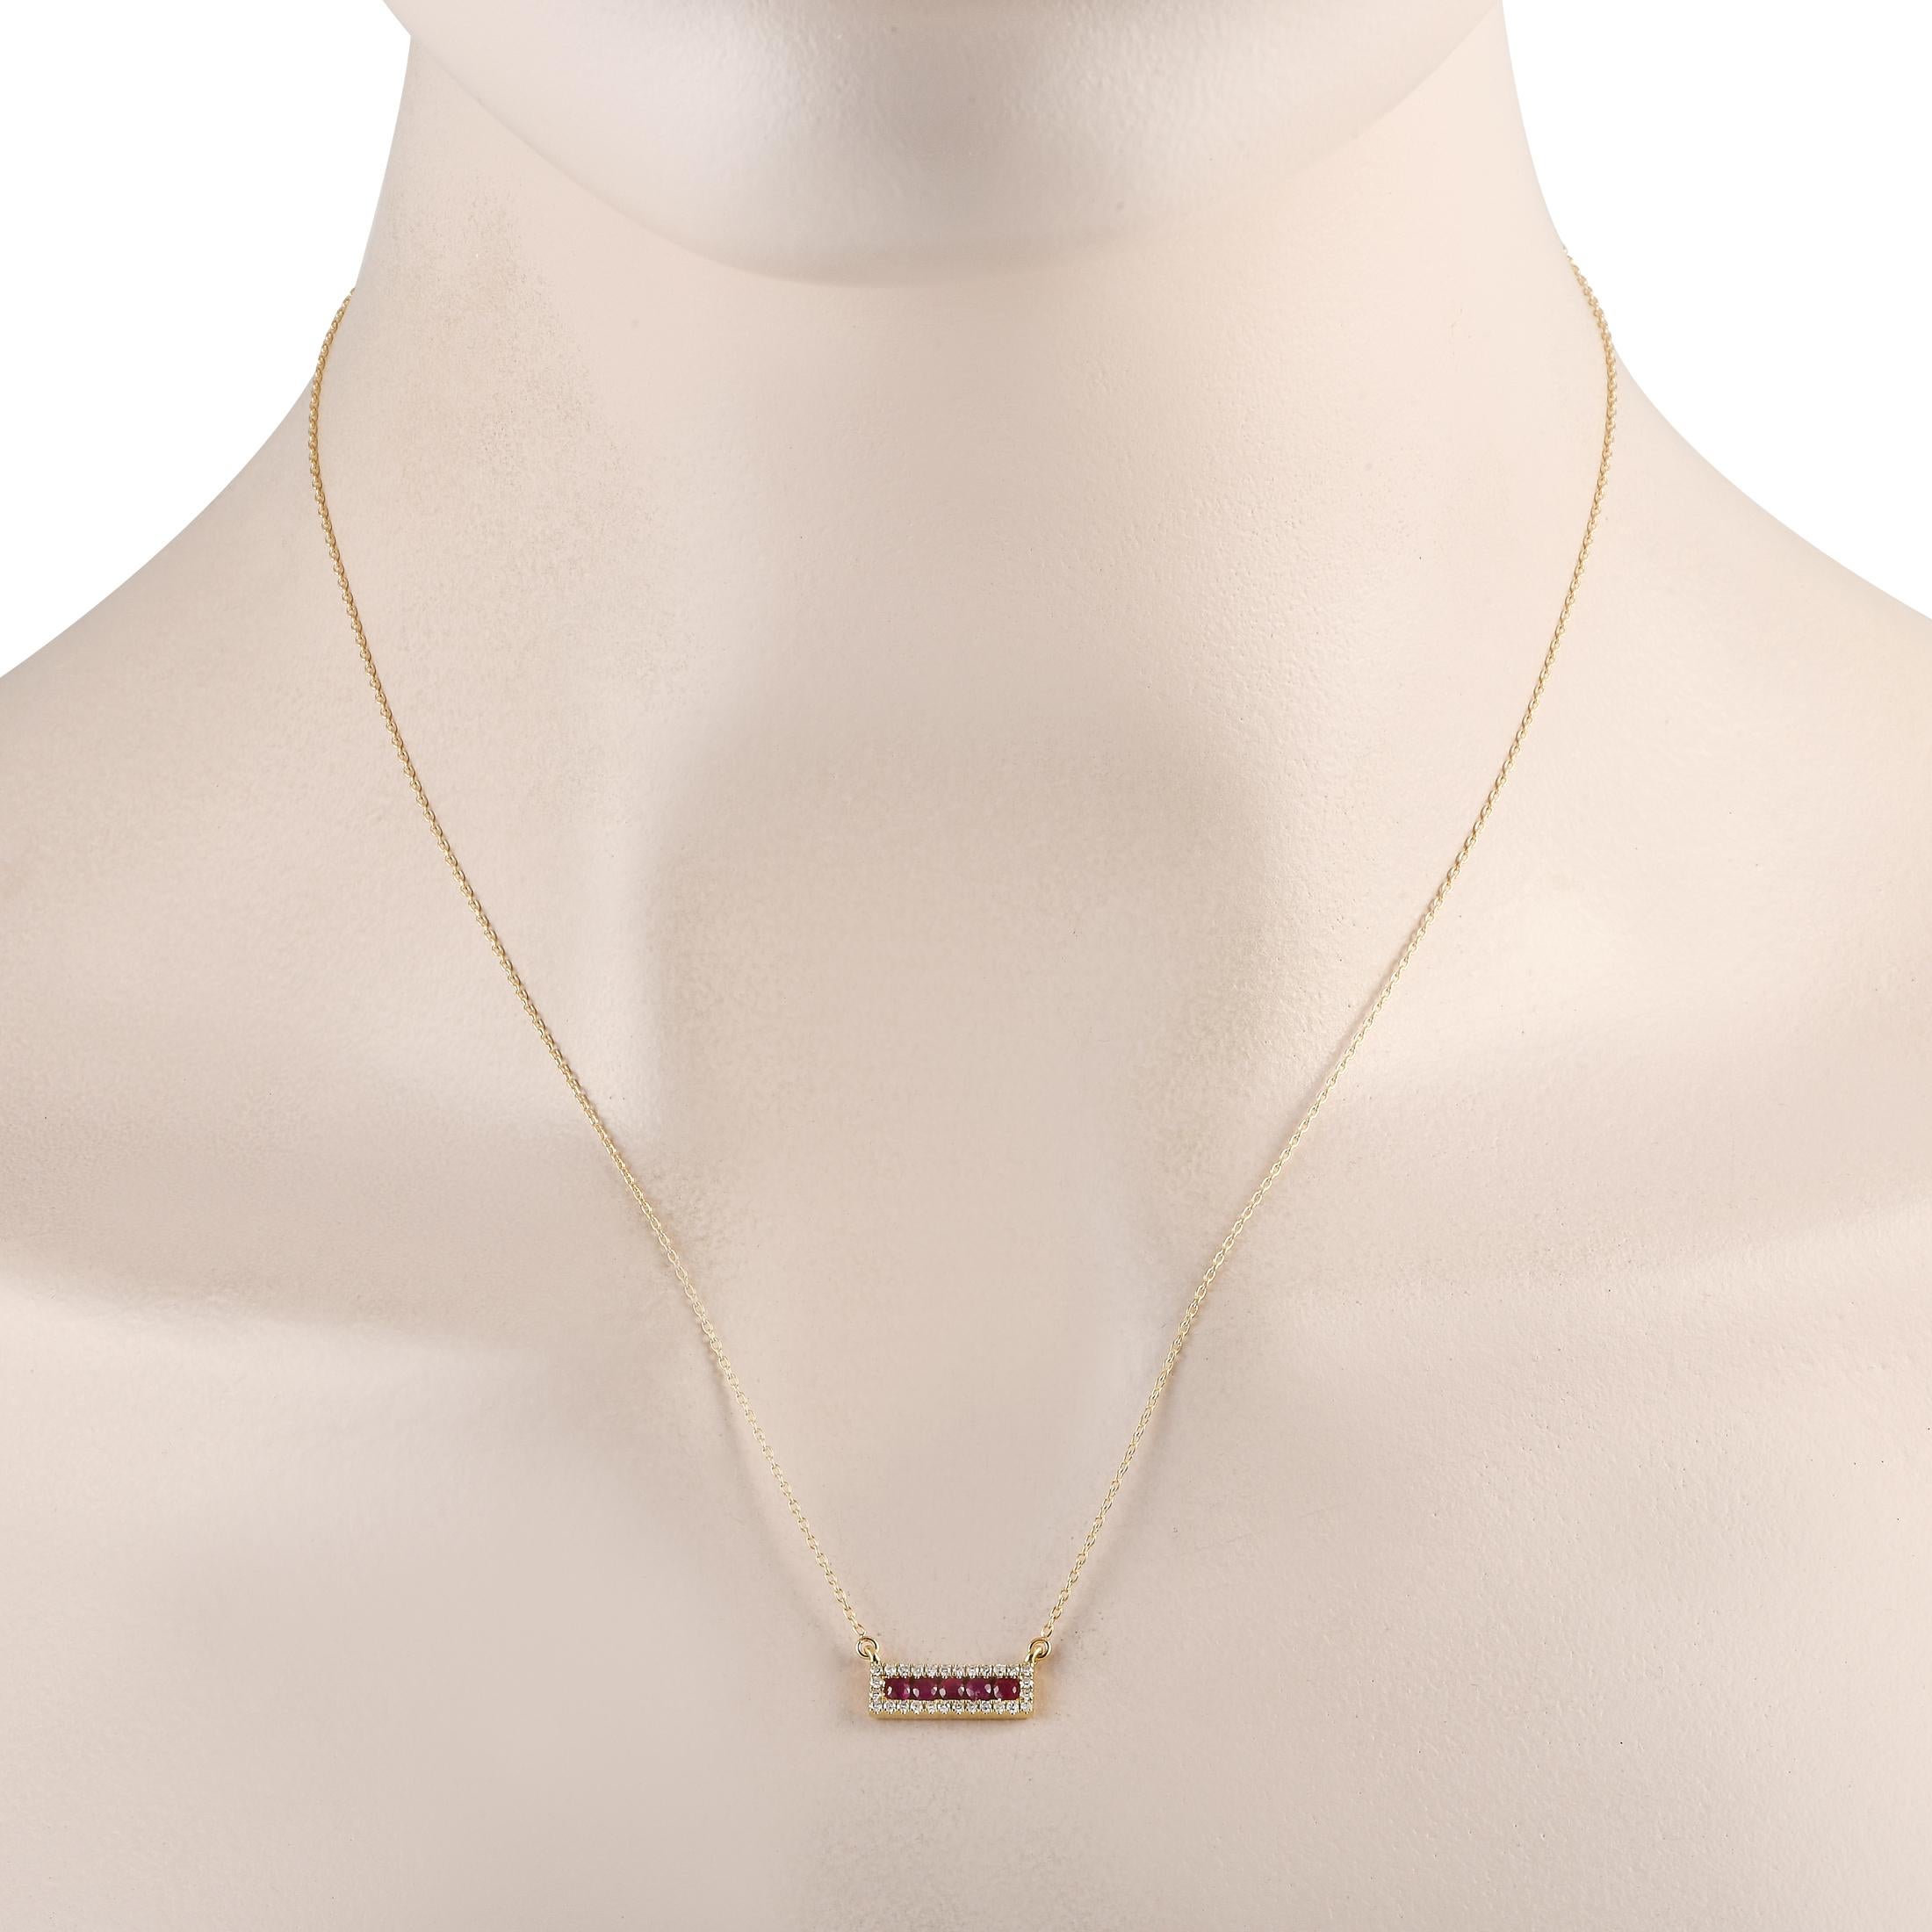 A series of captivating Ruby gemstones and sparkling Diamond accents totaling 0.15 carats make this necklace simply unforgettable. Charming and elegant, this piece features a 14K Yellow Gold pendant measuring 0.15 long by 0.65 wide suspended at the